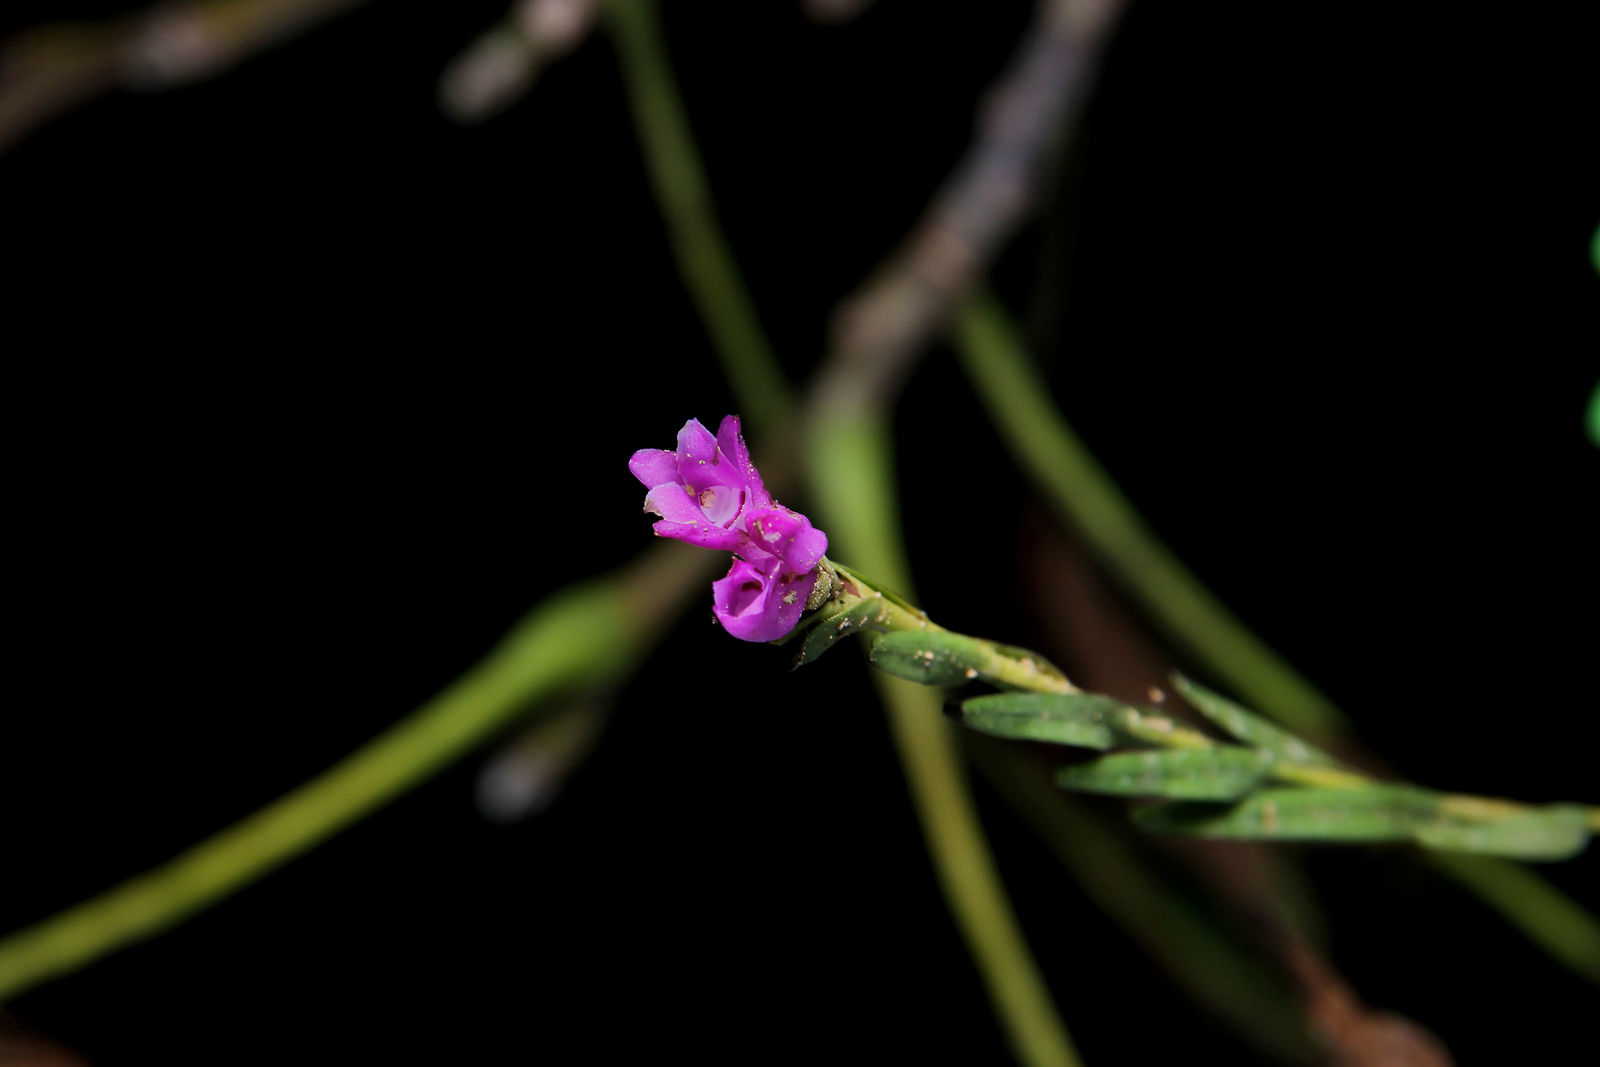 Isochilus linearis (Jacq.) R.Br. | Plants of the World Online | Kew Science